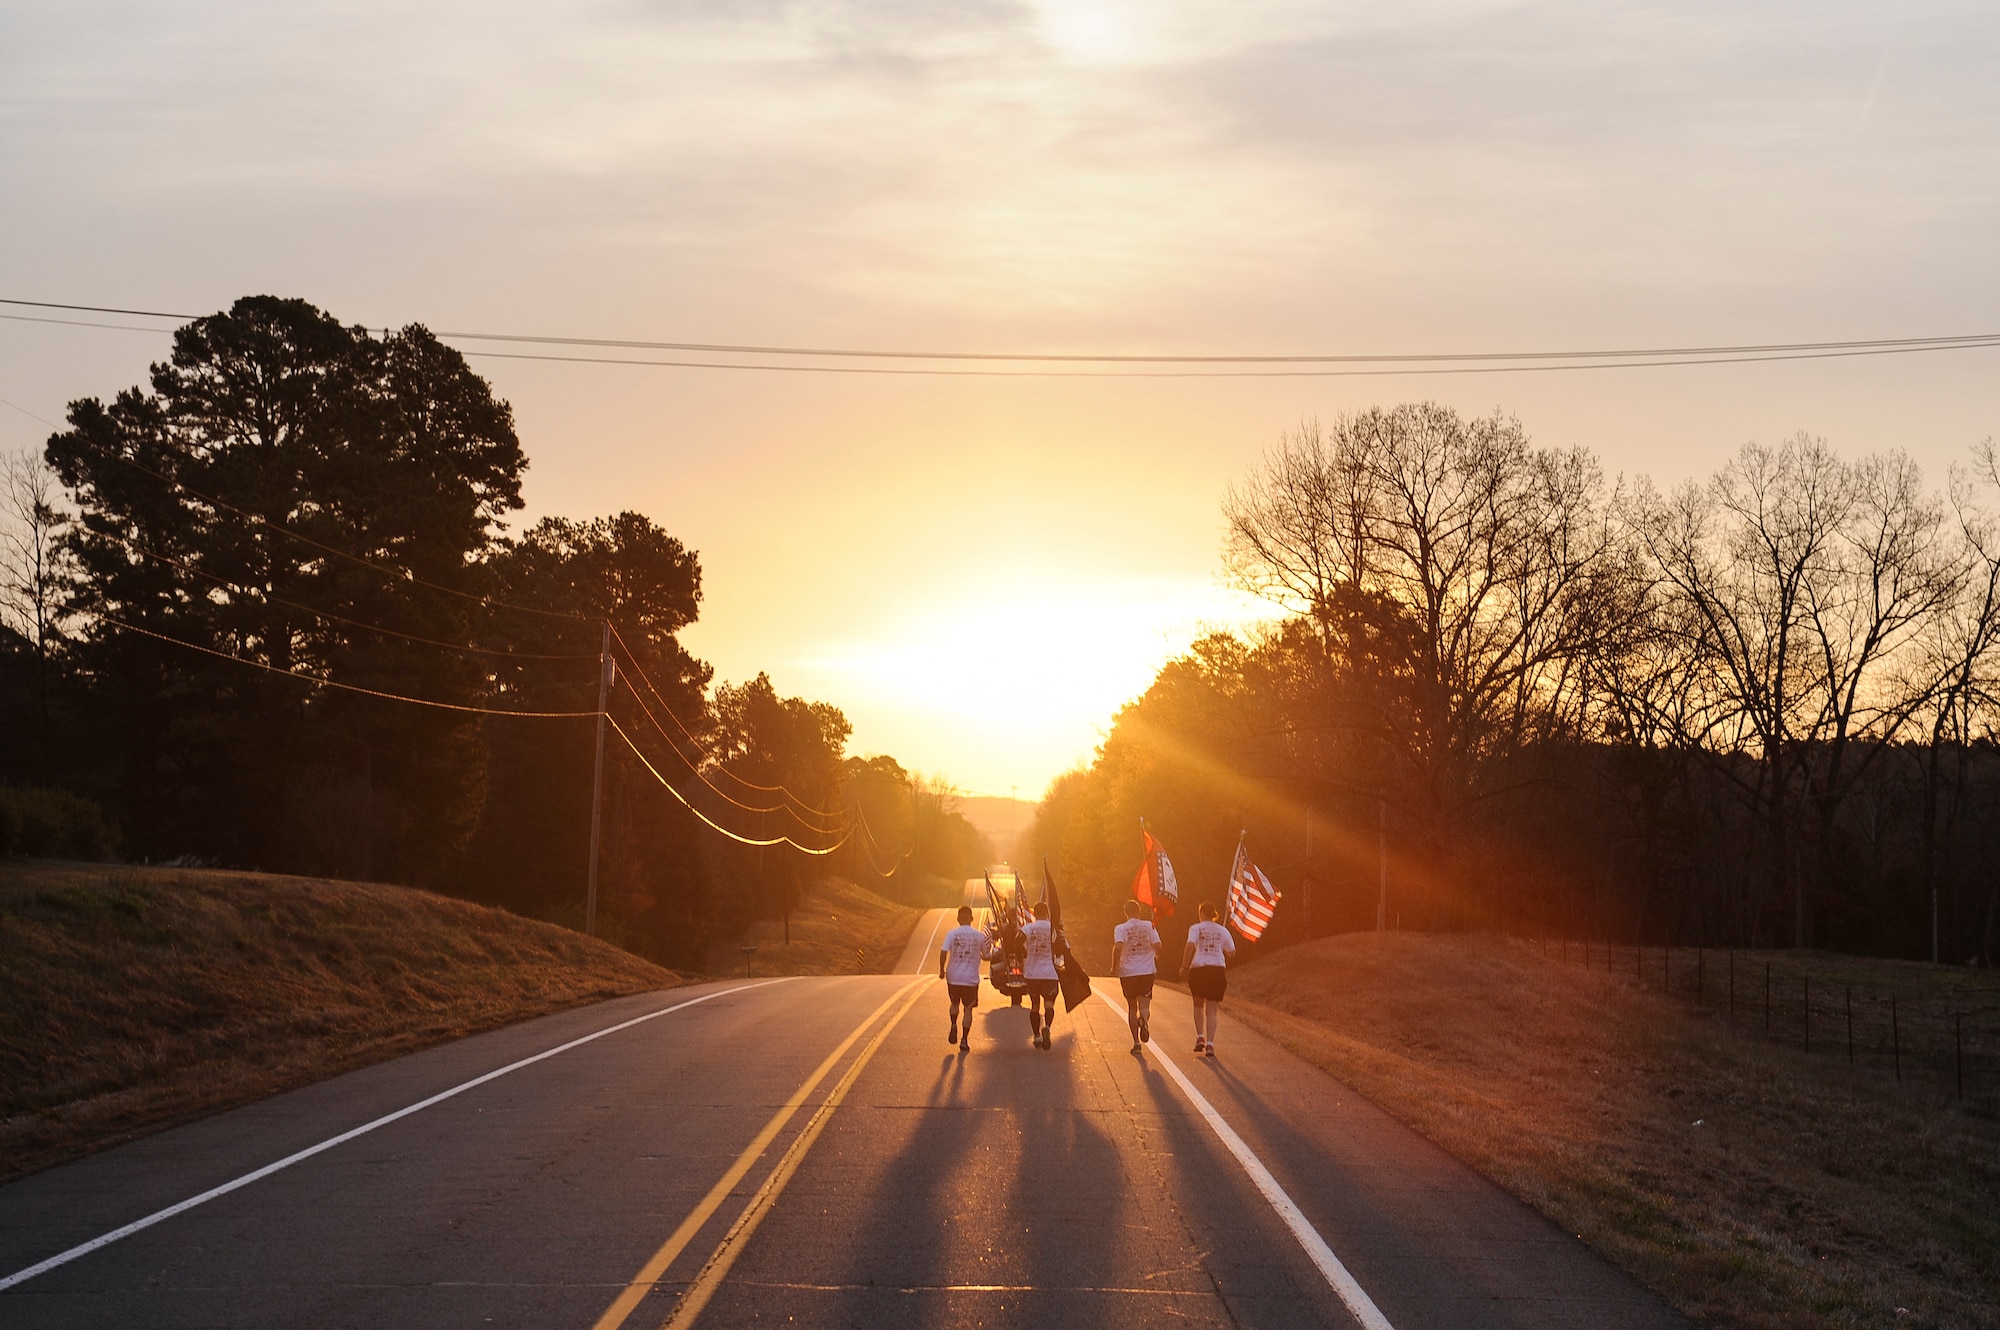 The second team of runners pick up the flags and begins their leg of the event March 20, 2015, at Altus, Ark. Twenty one, four-man-teams participated in the event by running and carrying the American flag, the Arkansas state flag, as well as a smaller American flag which had a fallen Arkansan’s bio attached to it. (U.S. Air Force photo/Senior Airman Cliffton Dolezal)